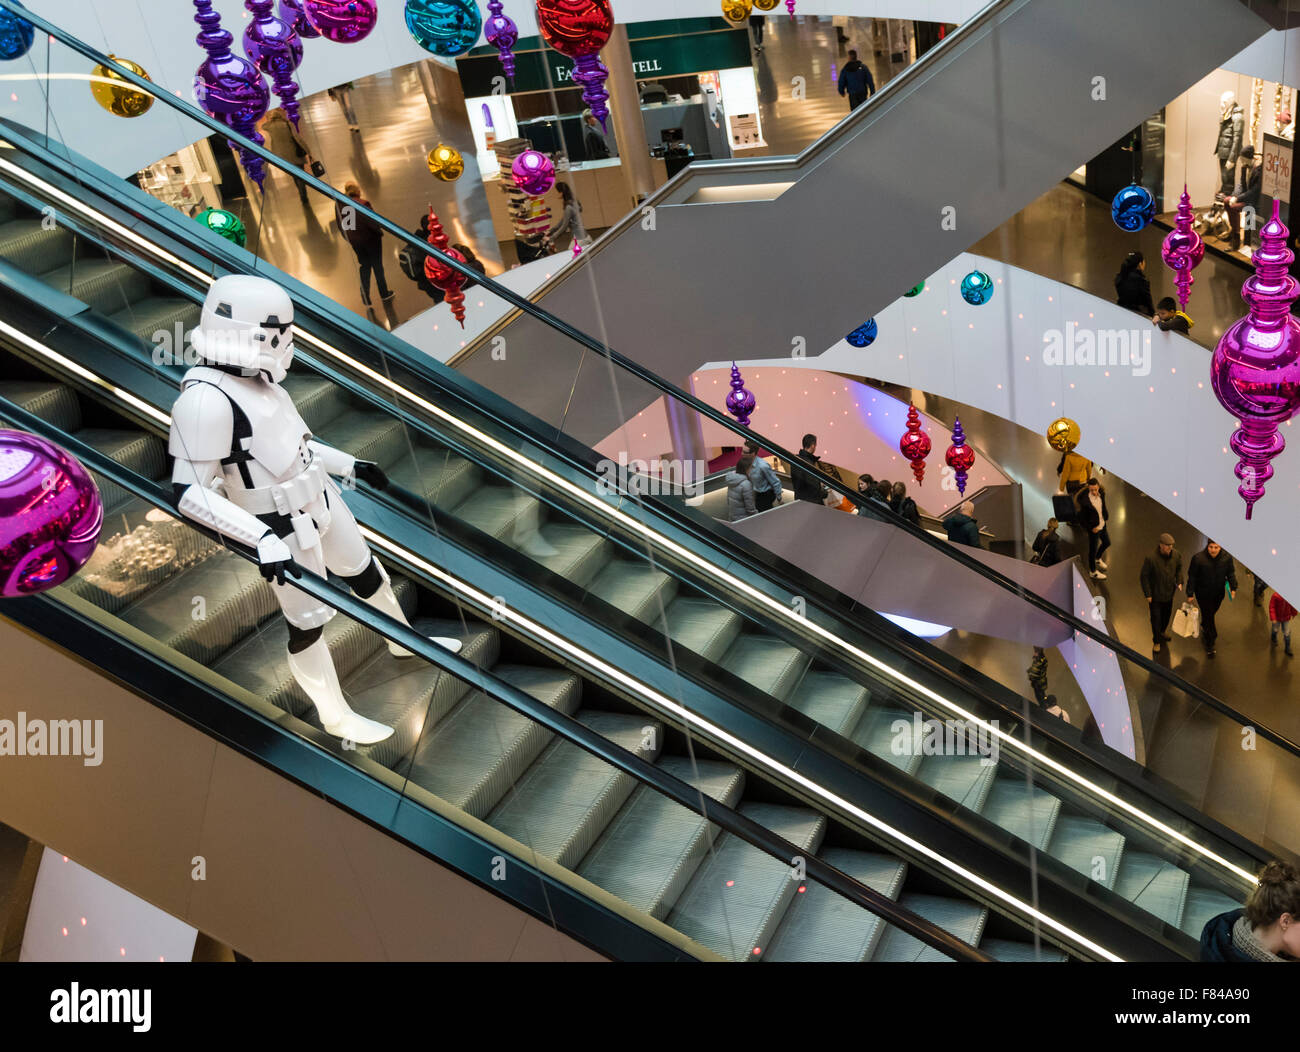 Zurich, Switzerland. 05th Dec, 2015. During a promotion event for the new  upcoming Star Wars movie at a Zurich shopping centre, a costumed Star Wars  Imperial Stormtrooper takes a break on the